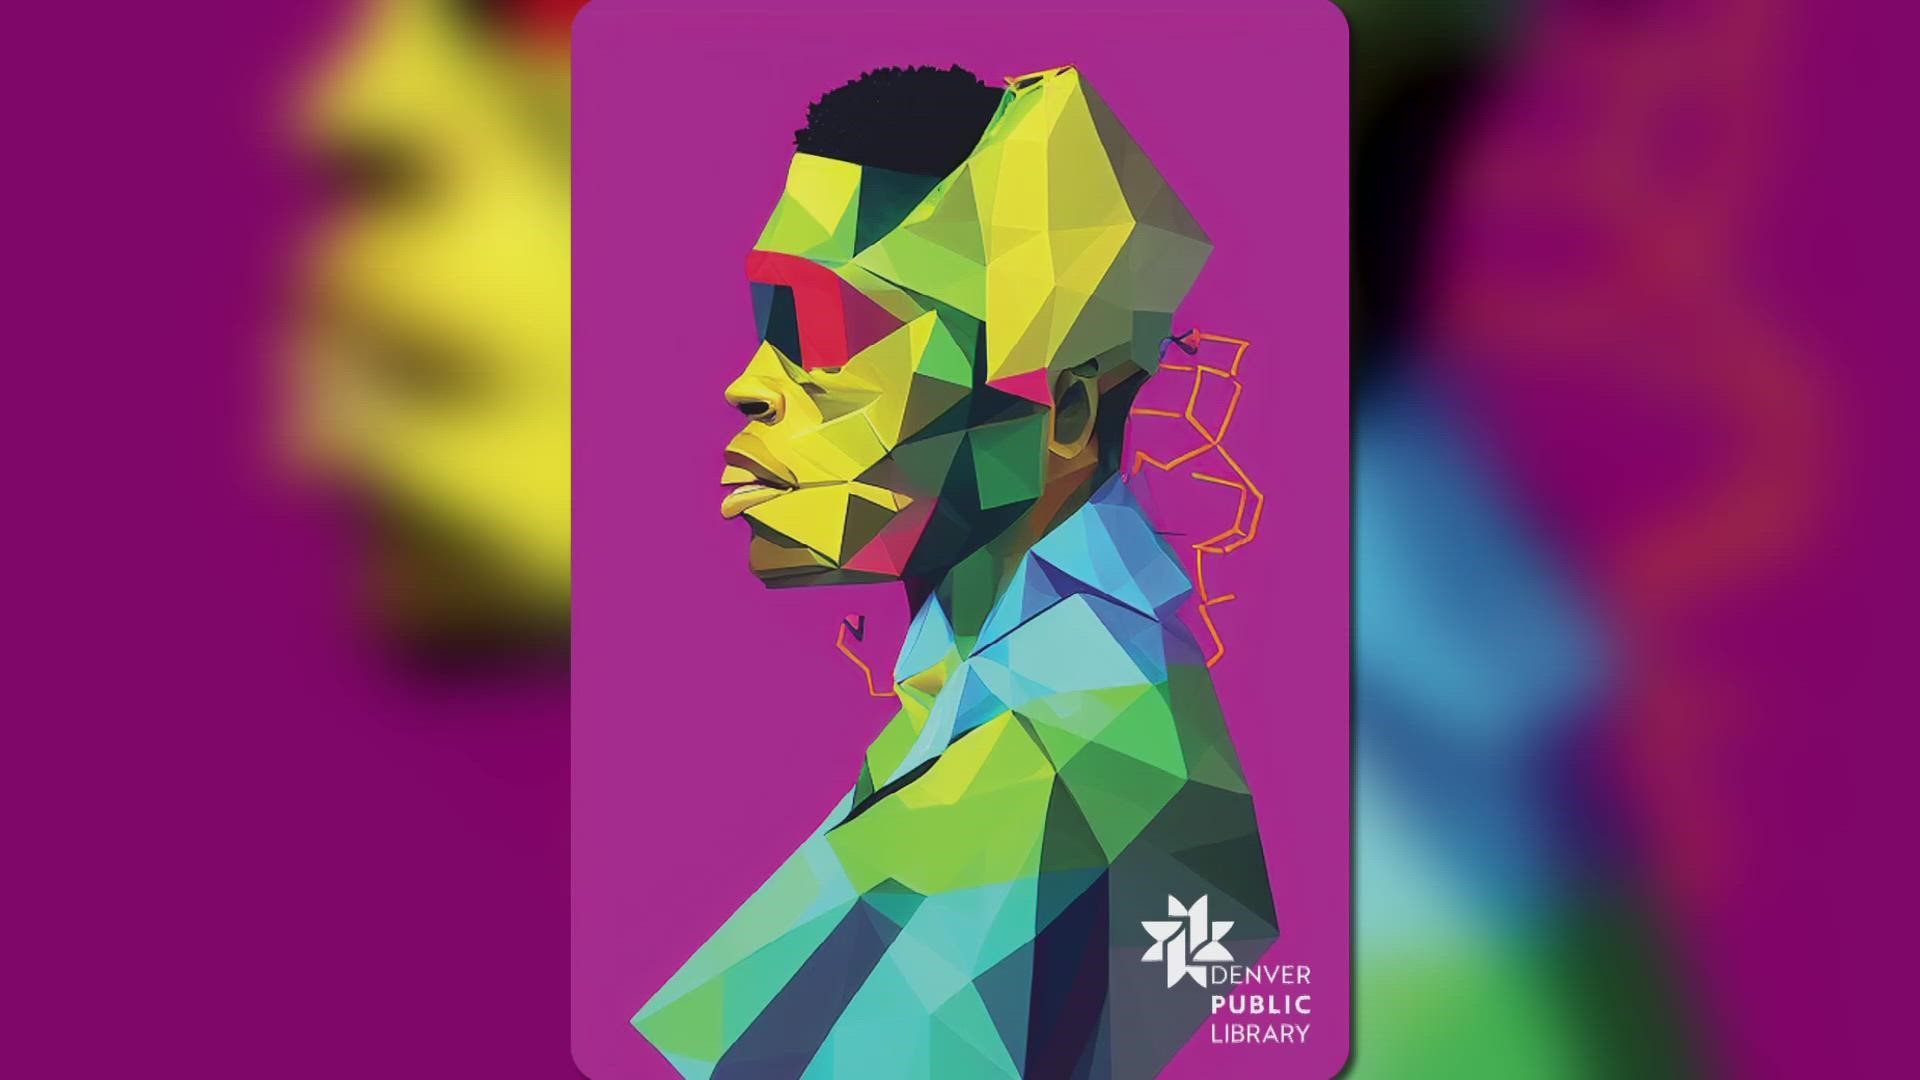 Denver Public Library held a competition to design a new library card in celebration of Black History Month.